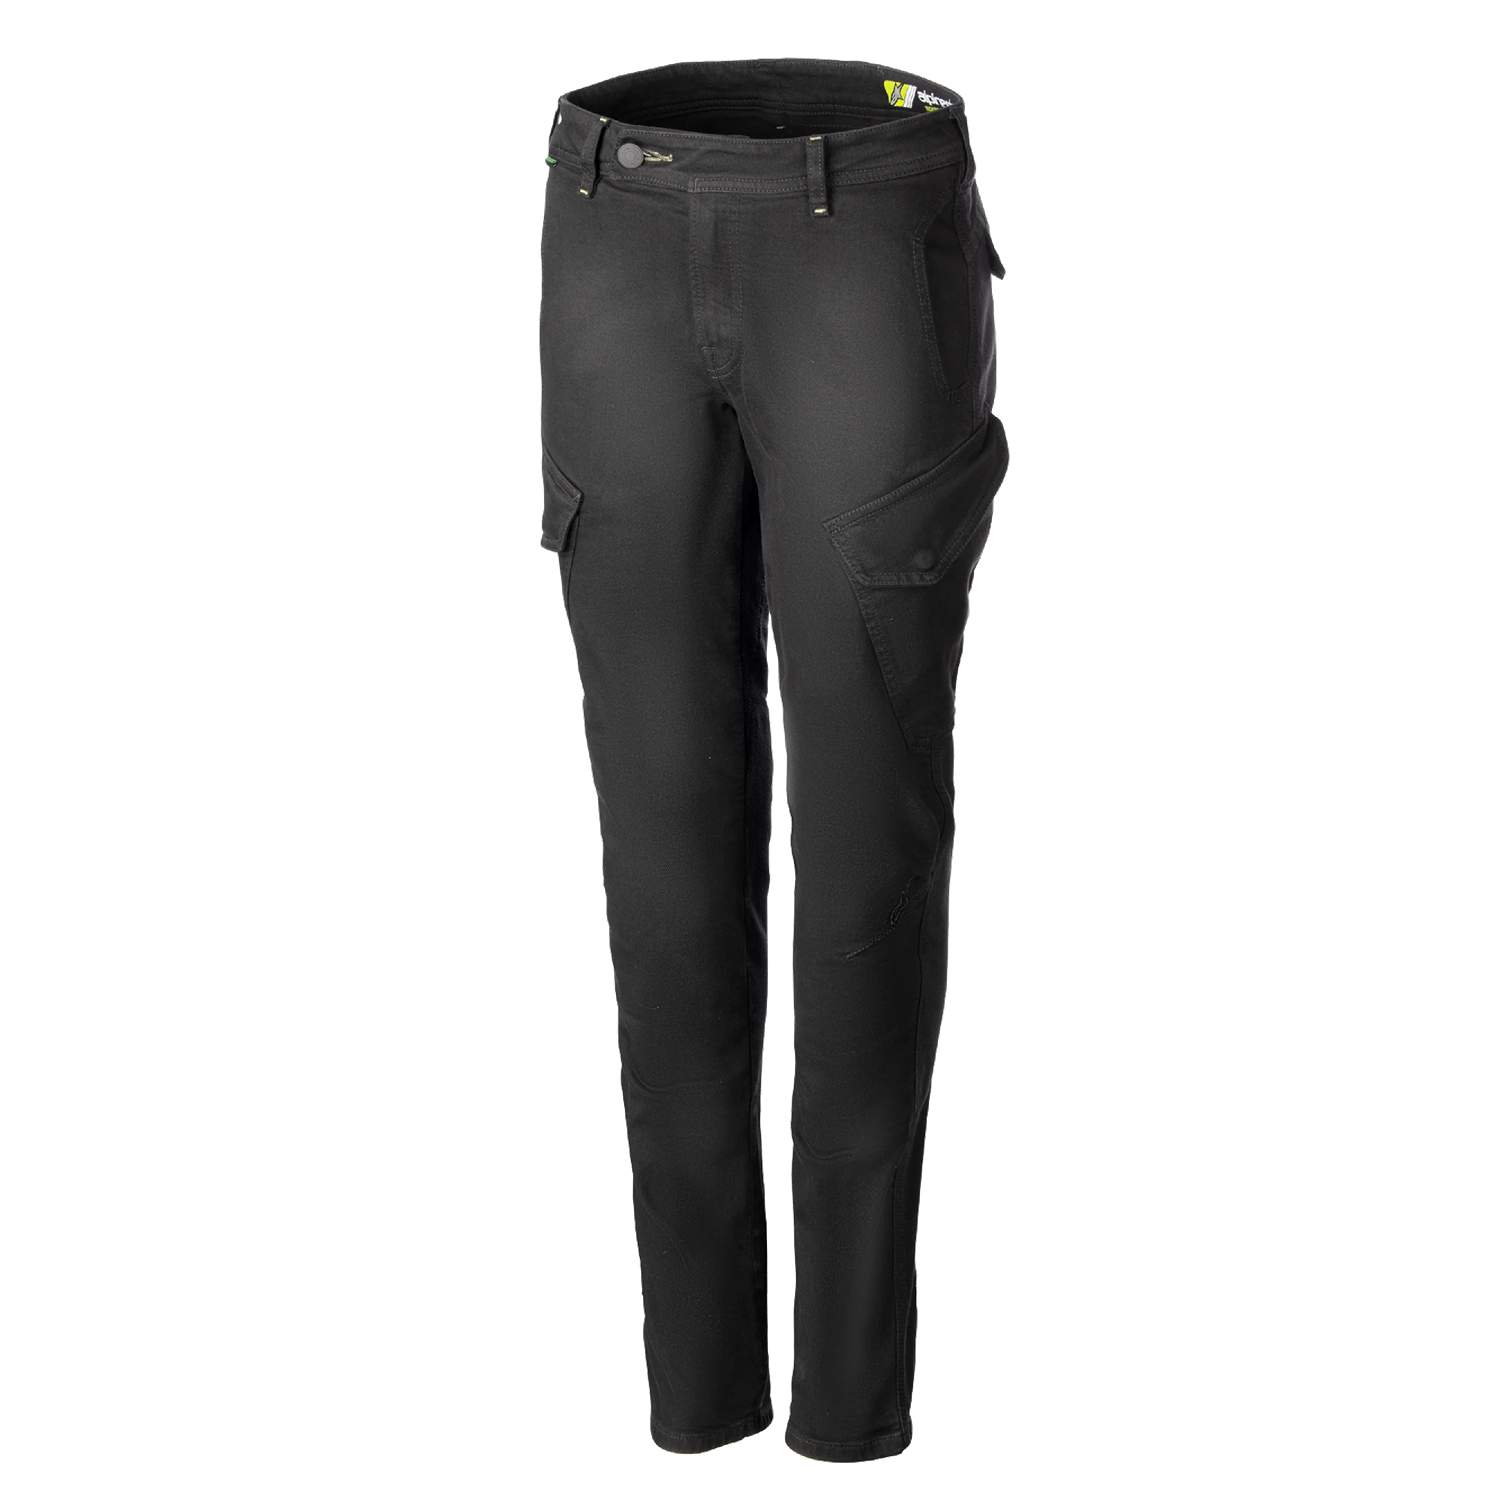 Image of Alpinestars Caliber Women's Tech Riding Pants Anthracite Taille 30